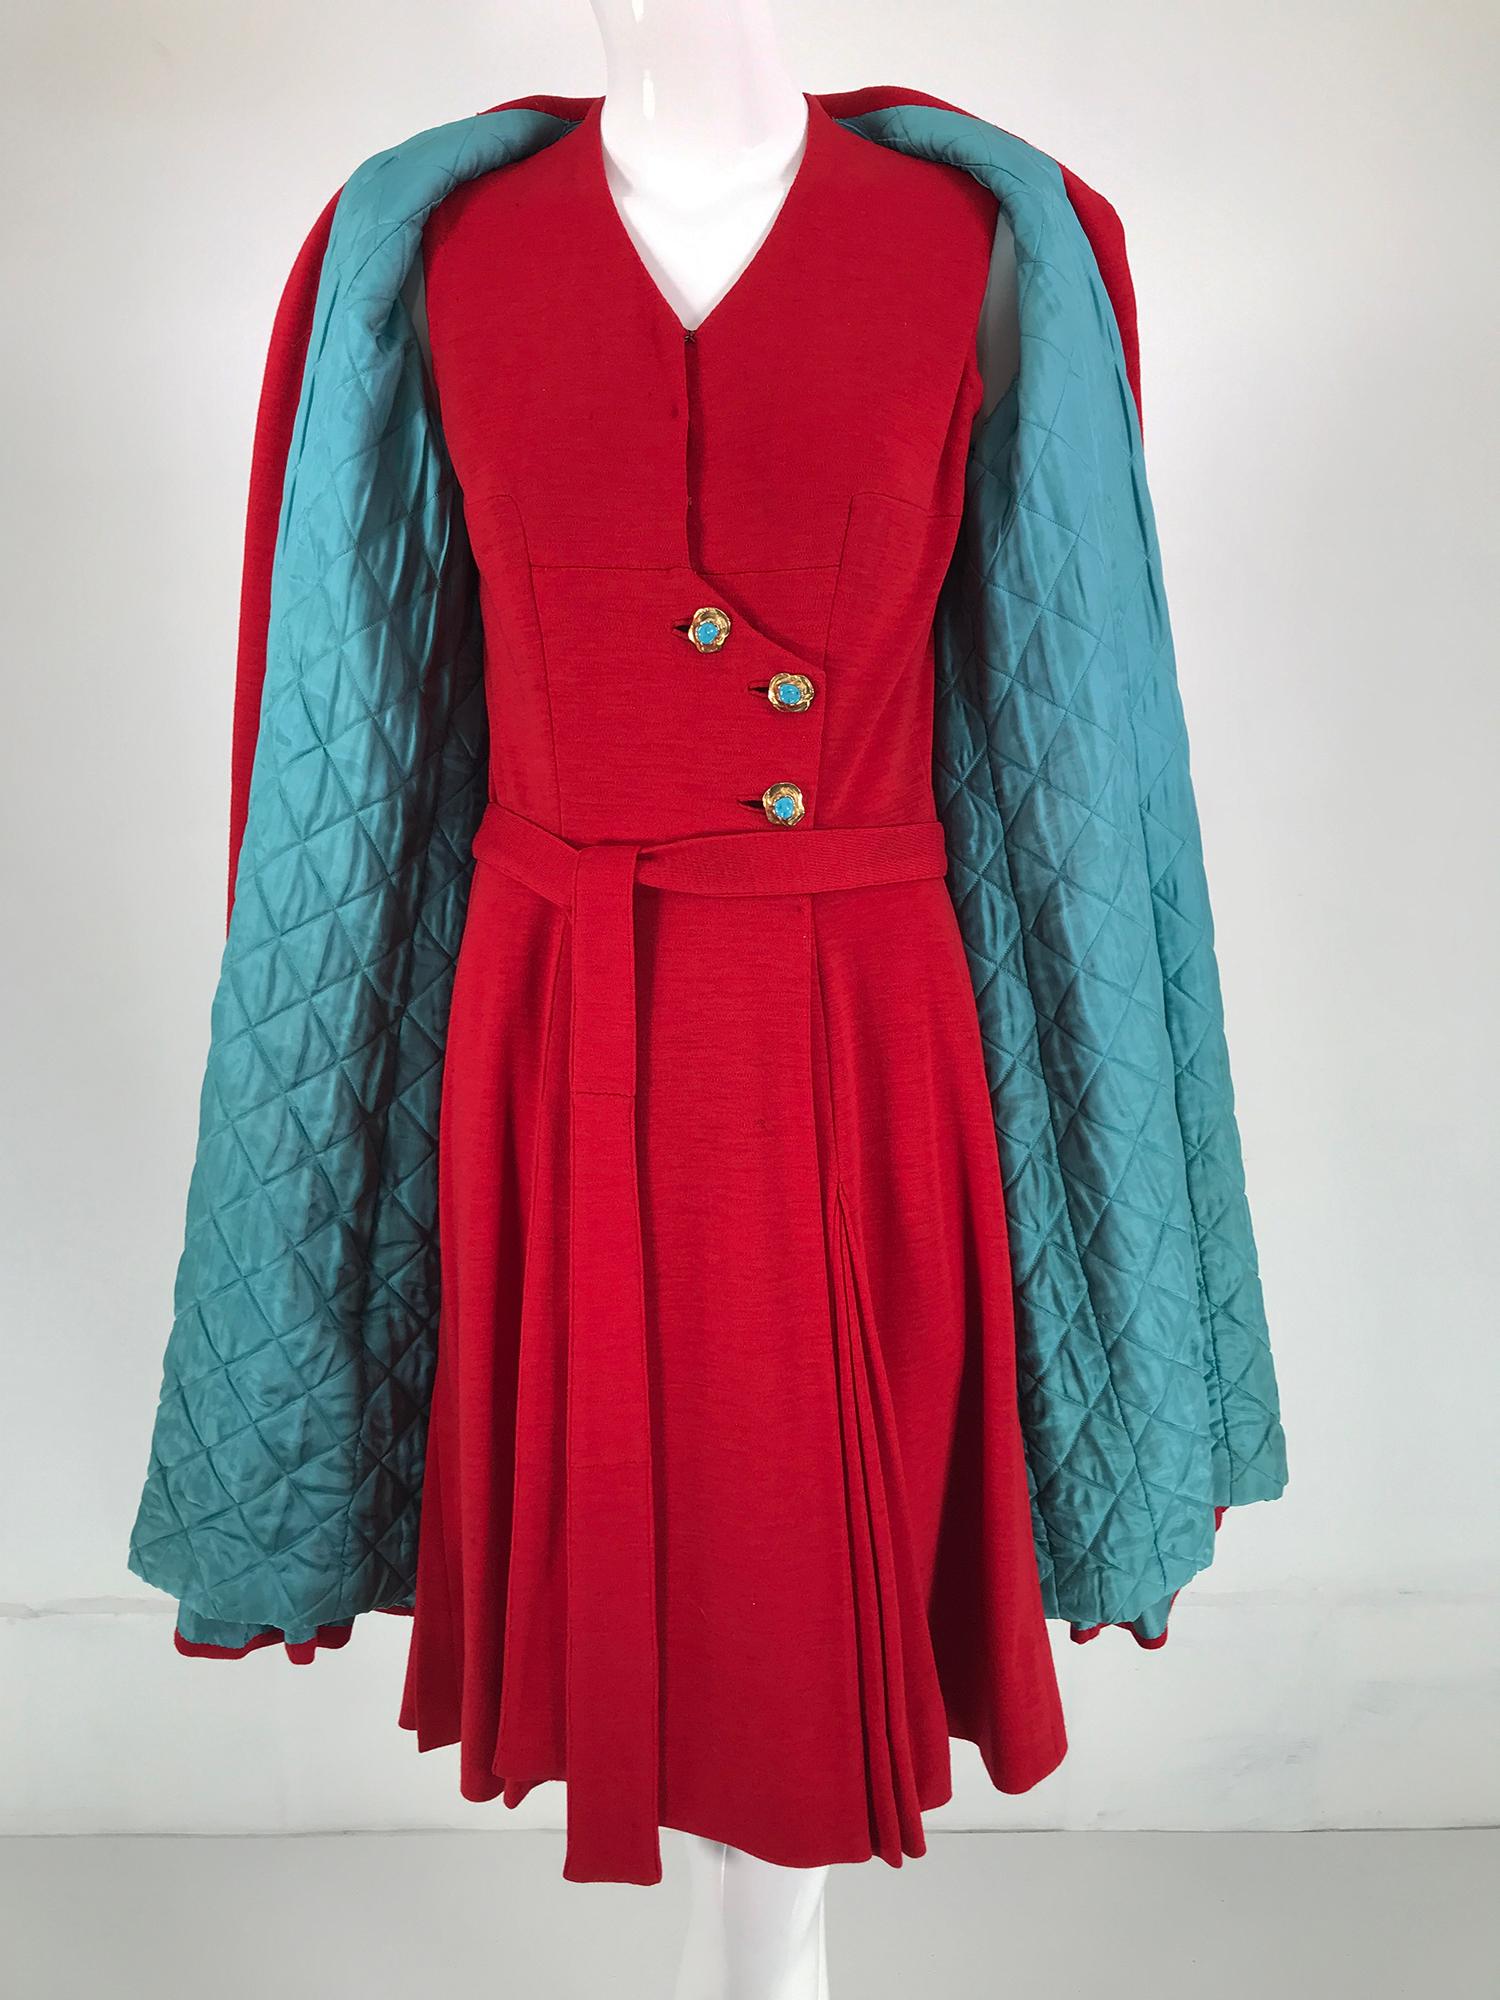 Chanel Red Haute Couture two piece wool knit jersey dress & coat with Gripoix gold & turquoise glass buttons, designed by Coco Chanel from the 1950s. Before Chanel, jersey was a lowly fabric, reserved for undergarments and work wear. It was neither